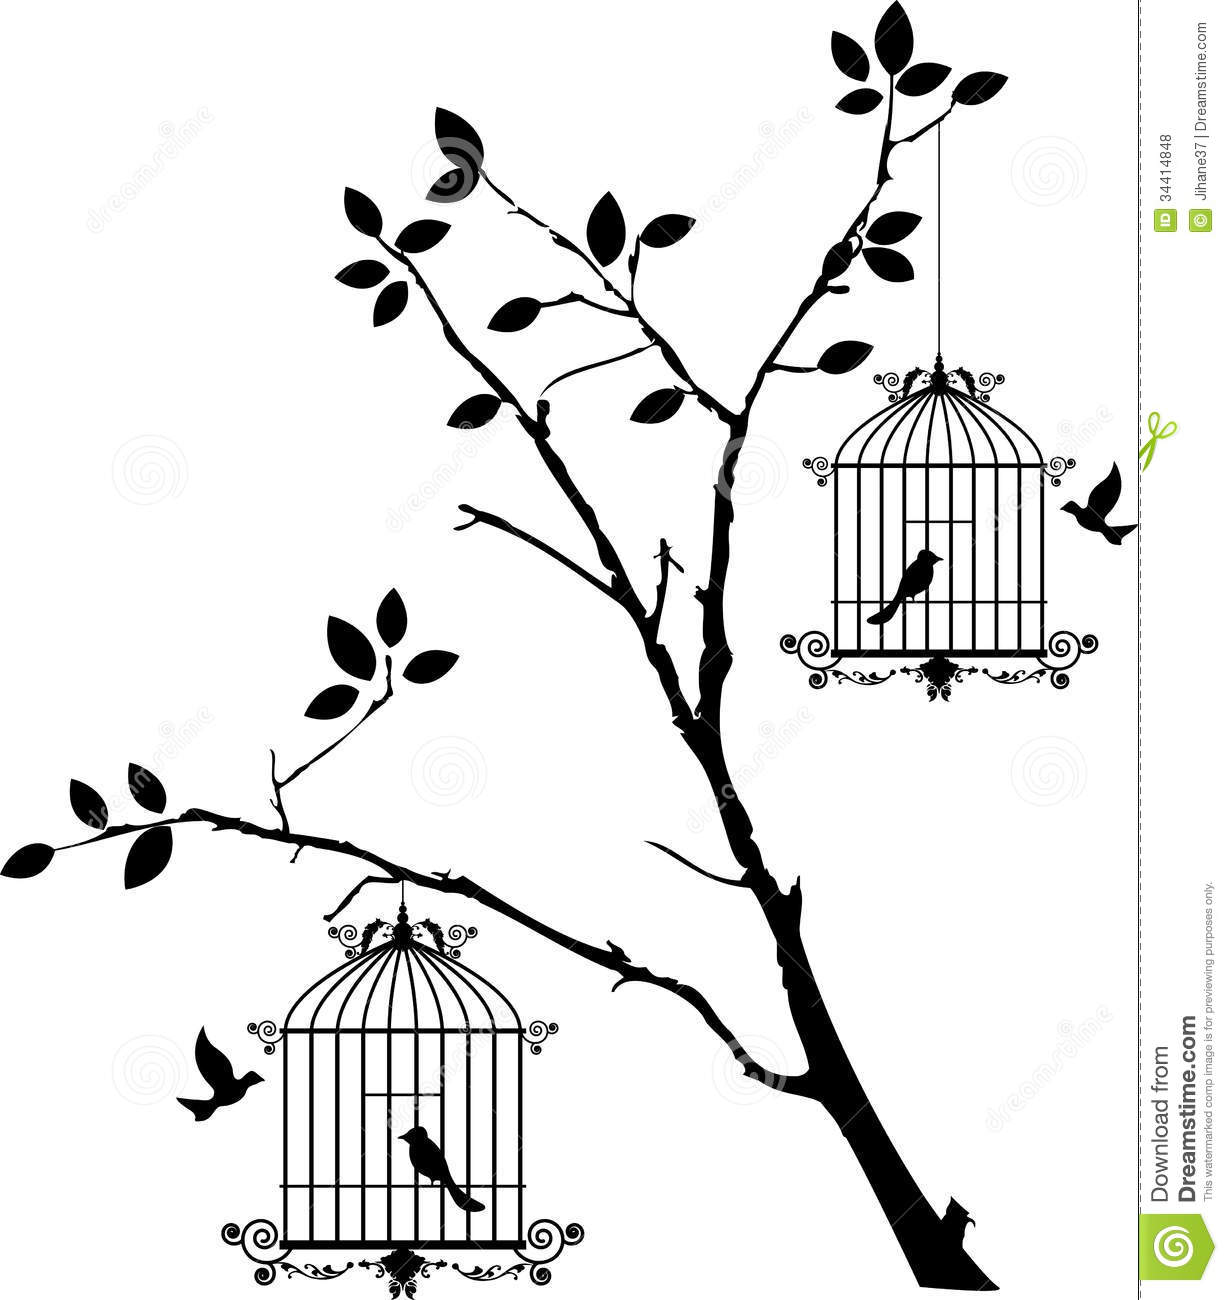 Tree Silhouette With Birds Flying And Bird In A Cage Royalty Free